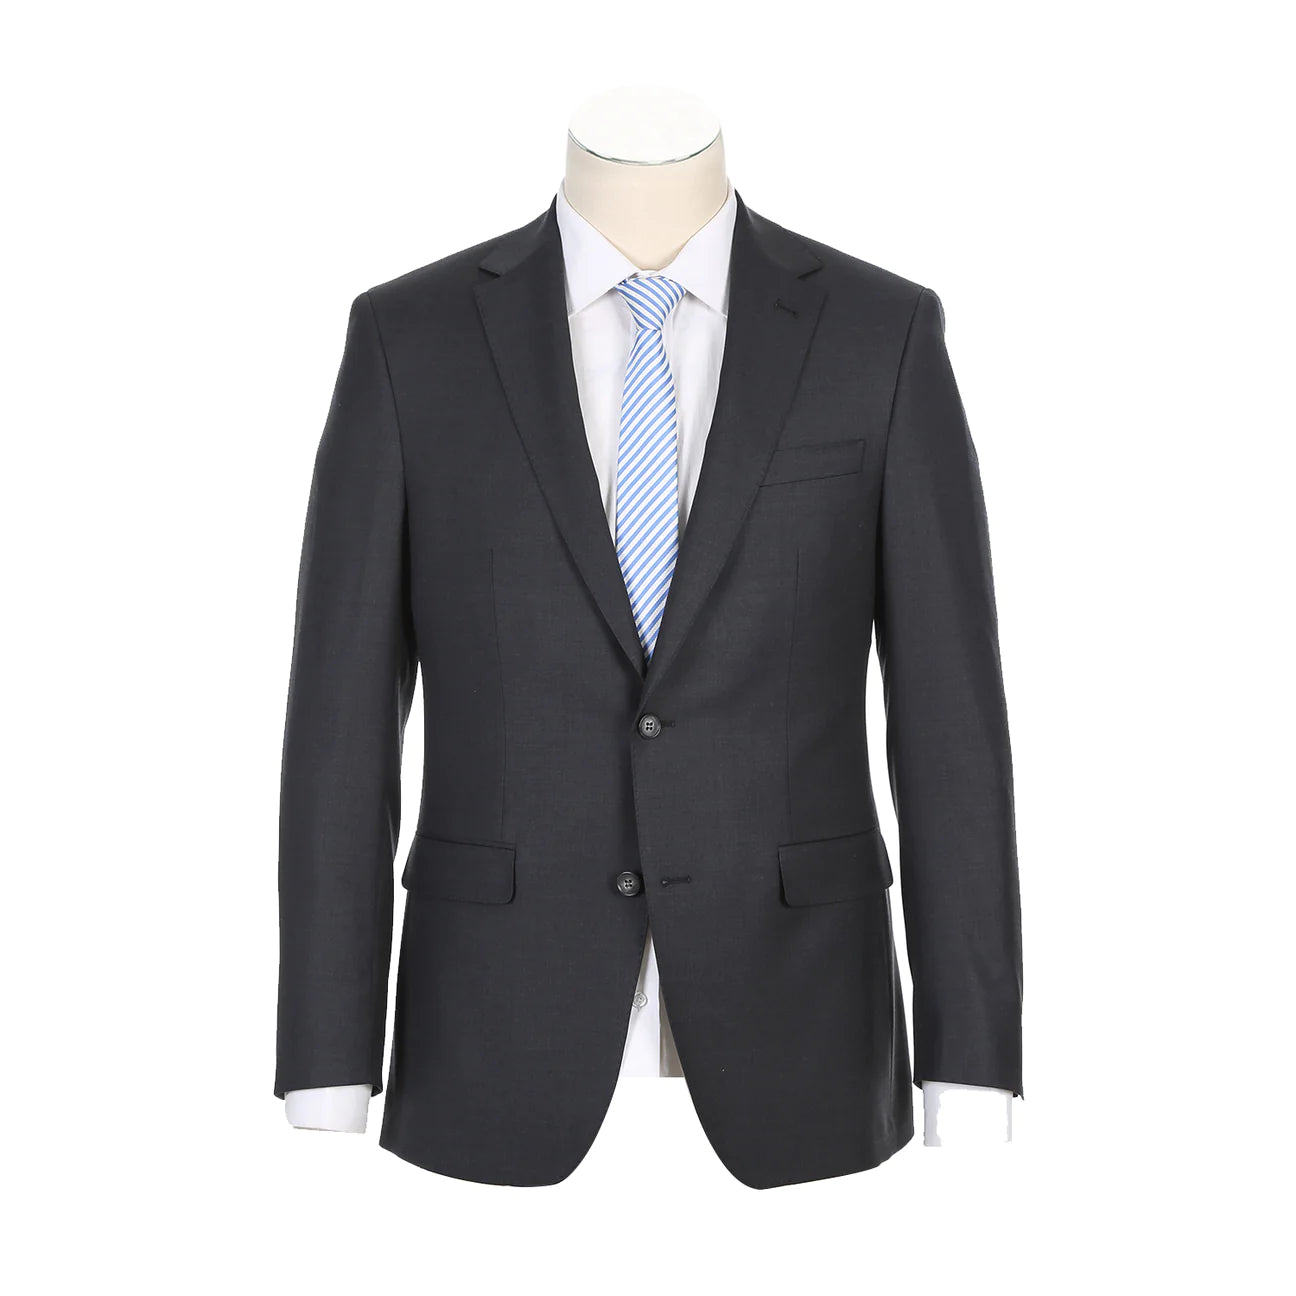 Rivelino Modern Fit Super 150's Wool Half Canvas Charcoal Suit